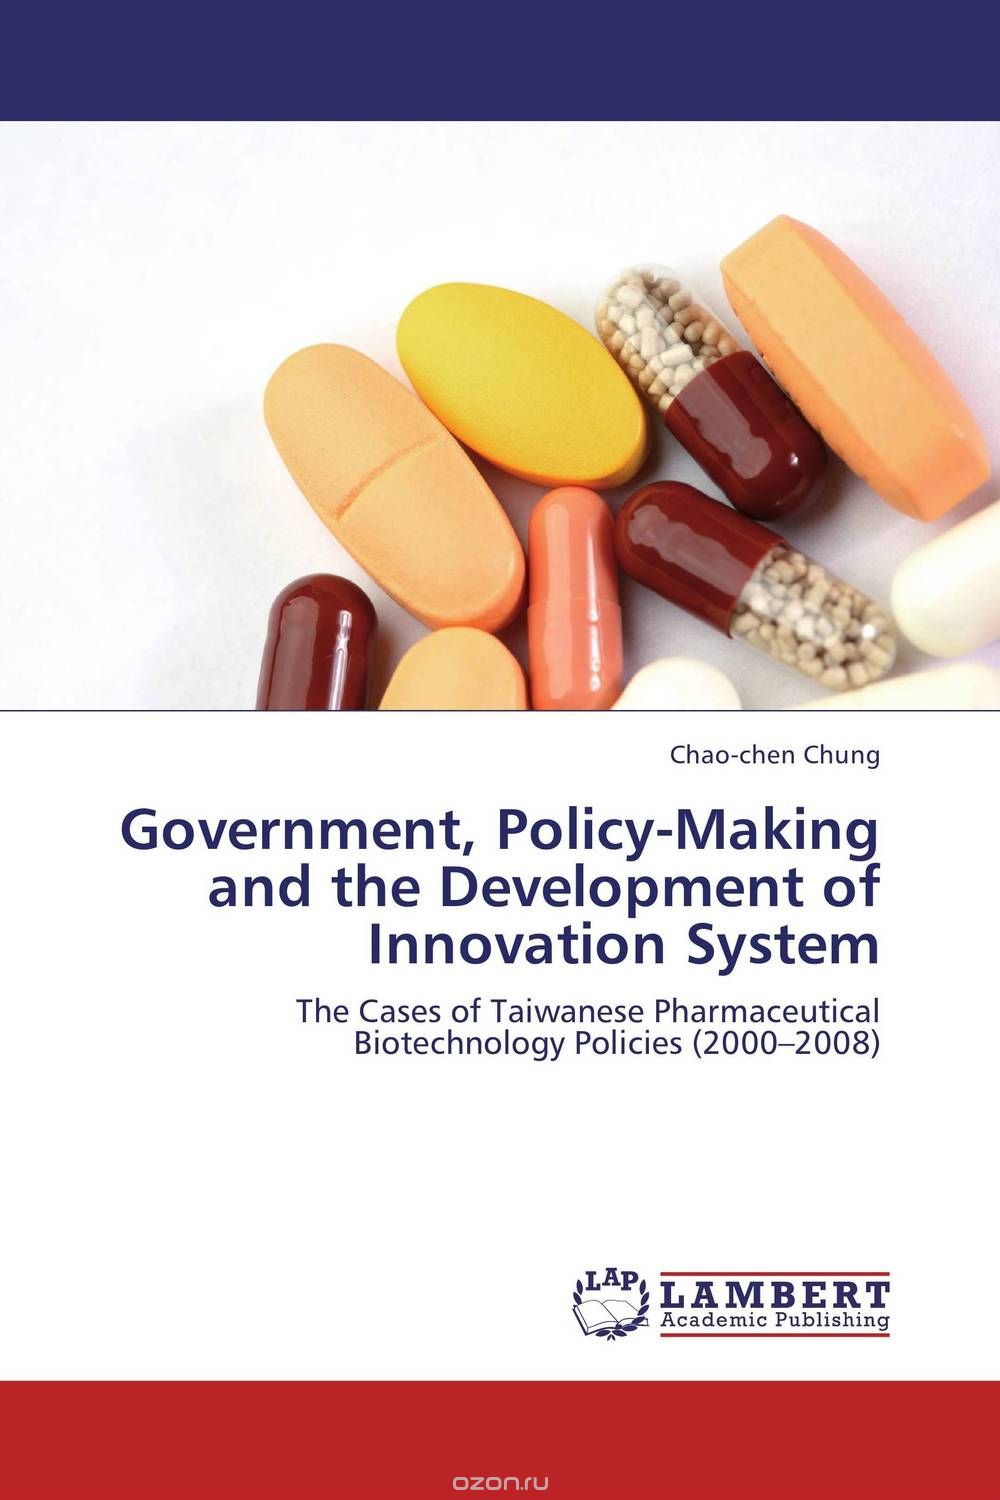 Government, Policy-Making and the Development of Innovation System